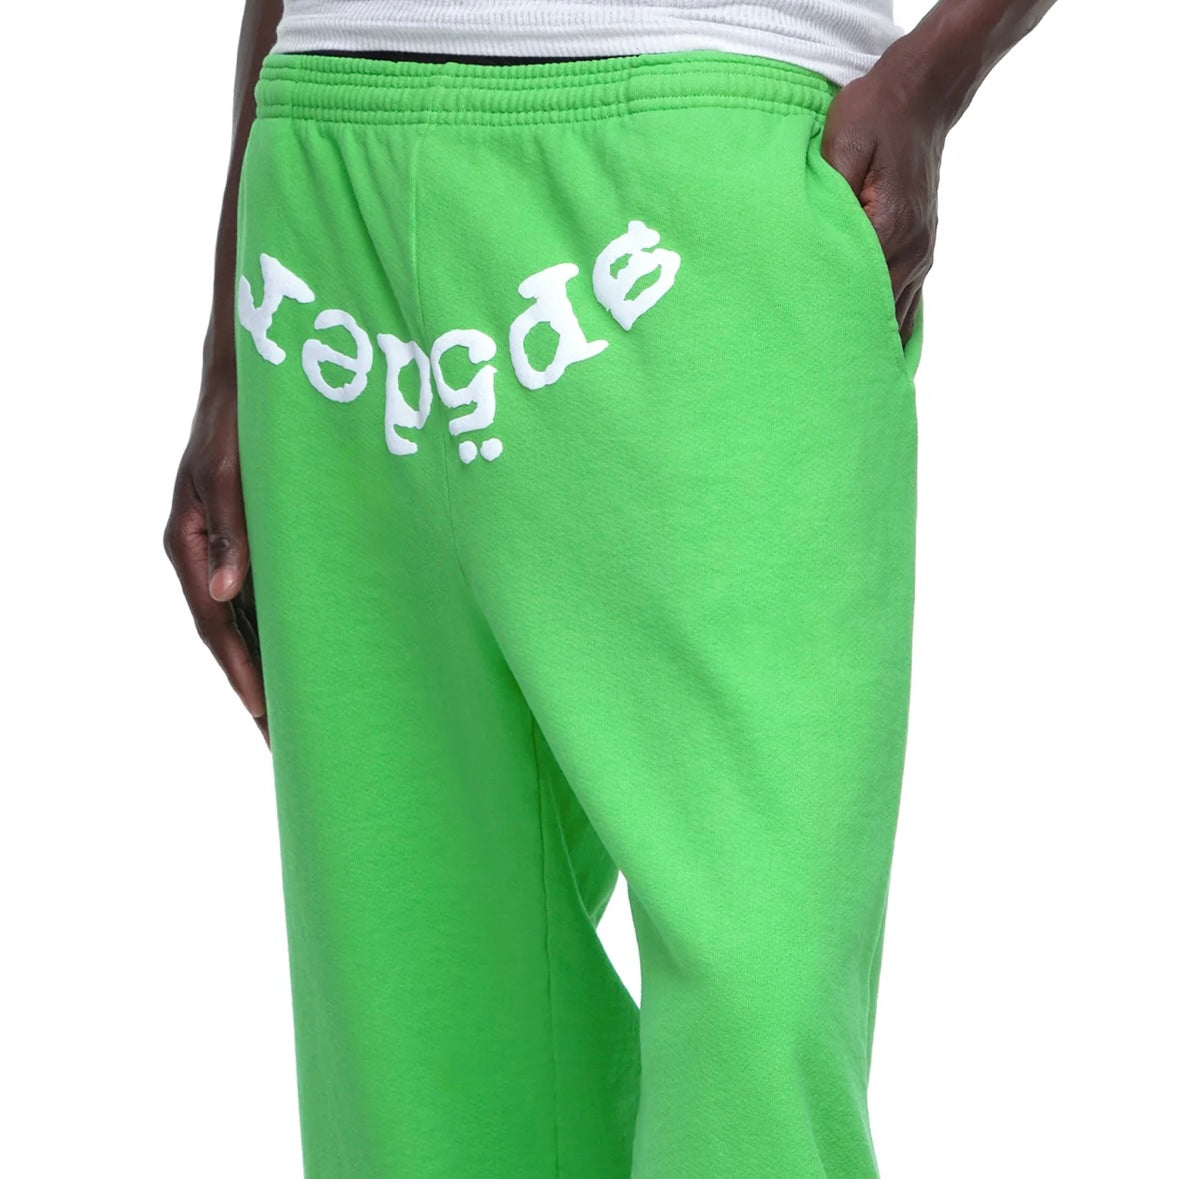 Sp5der Green White Legacy Sweatpants On Body Front Male